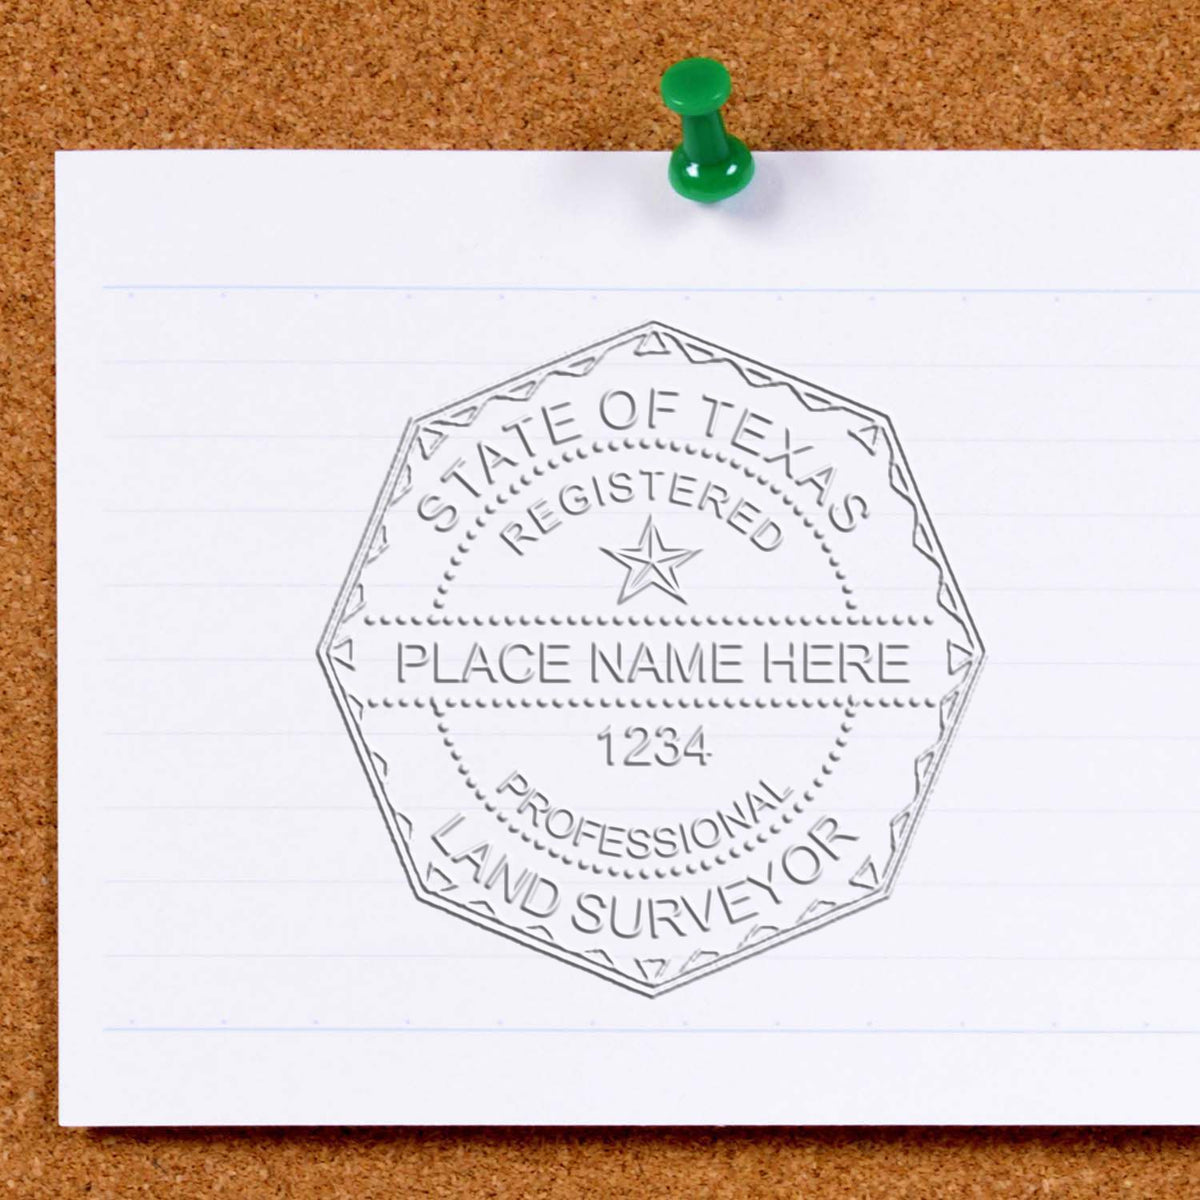 An alternative view of the Hybrid Texas Land Surveyor Seal stamped on a sheet of paper showing the image in use